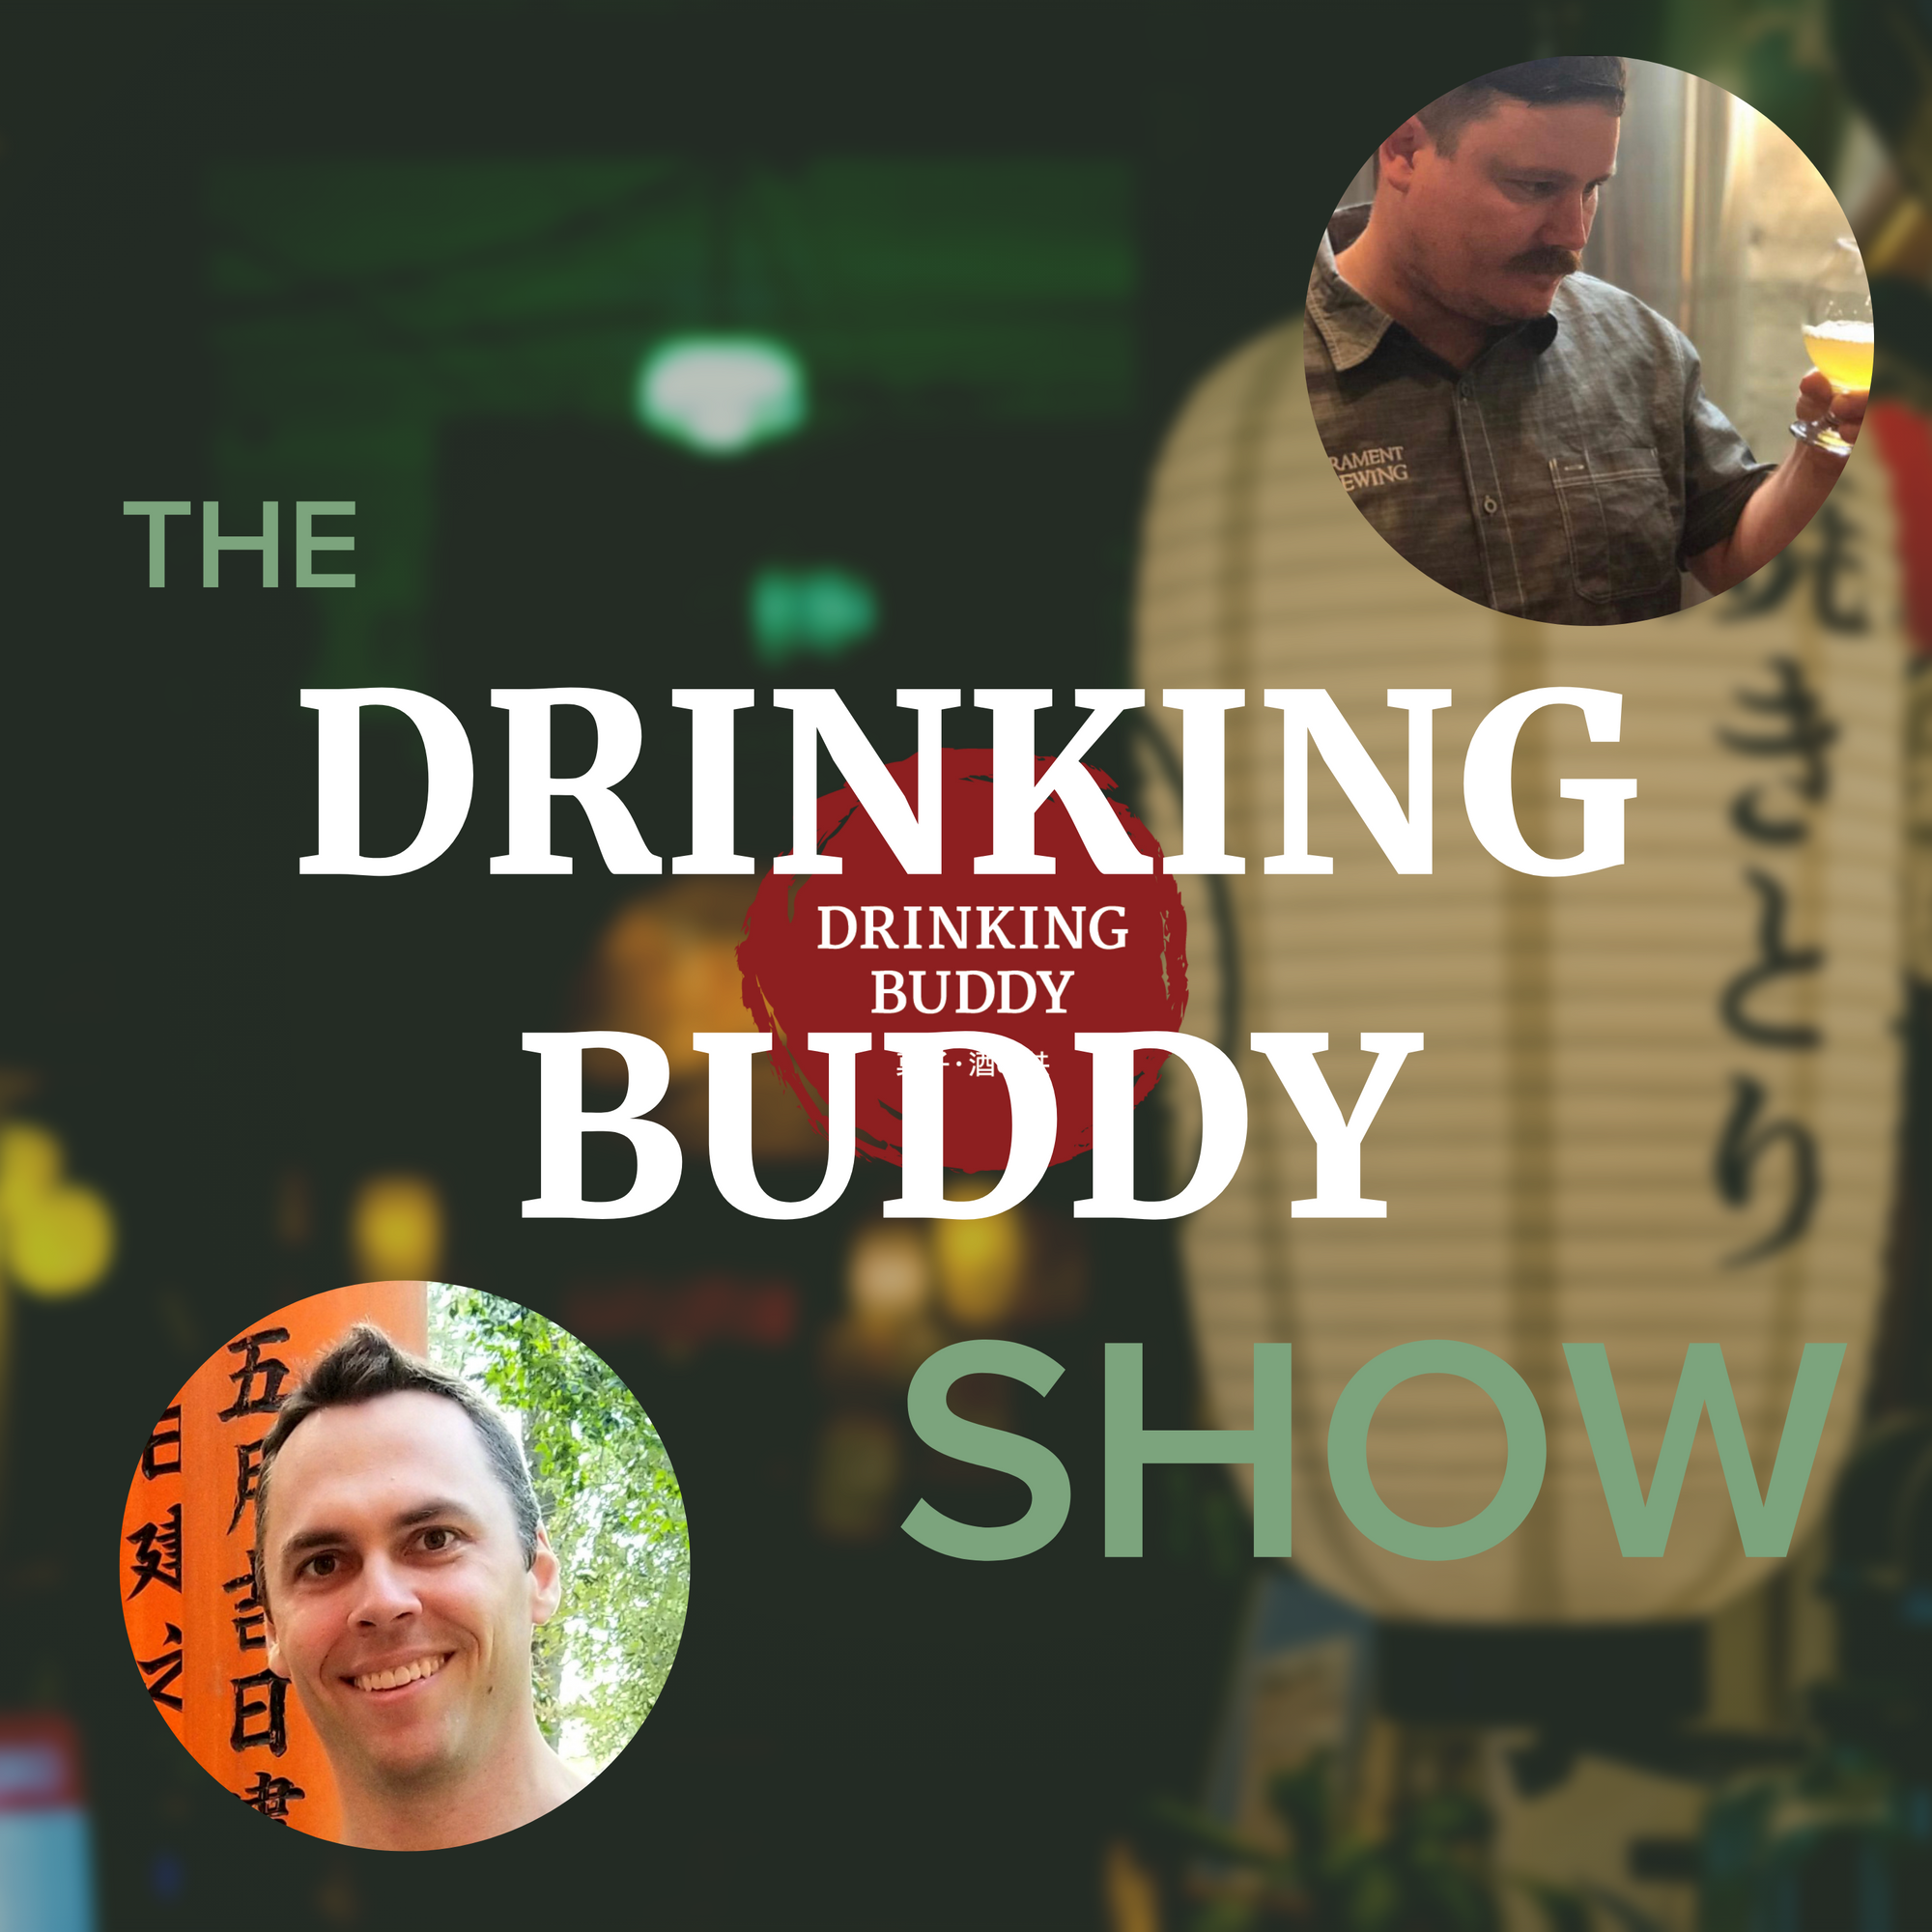 The Drinking Buddy Show Episode 7: Being a Craft Brewer with Brendan Megowan of Whale Face Beer